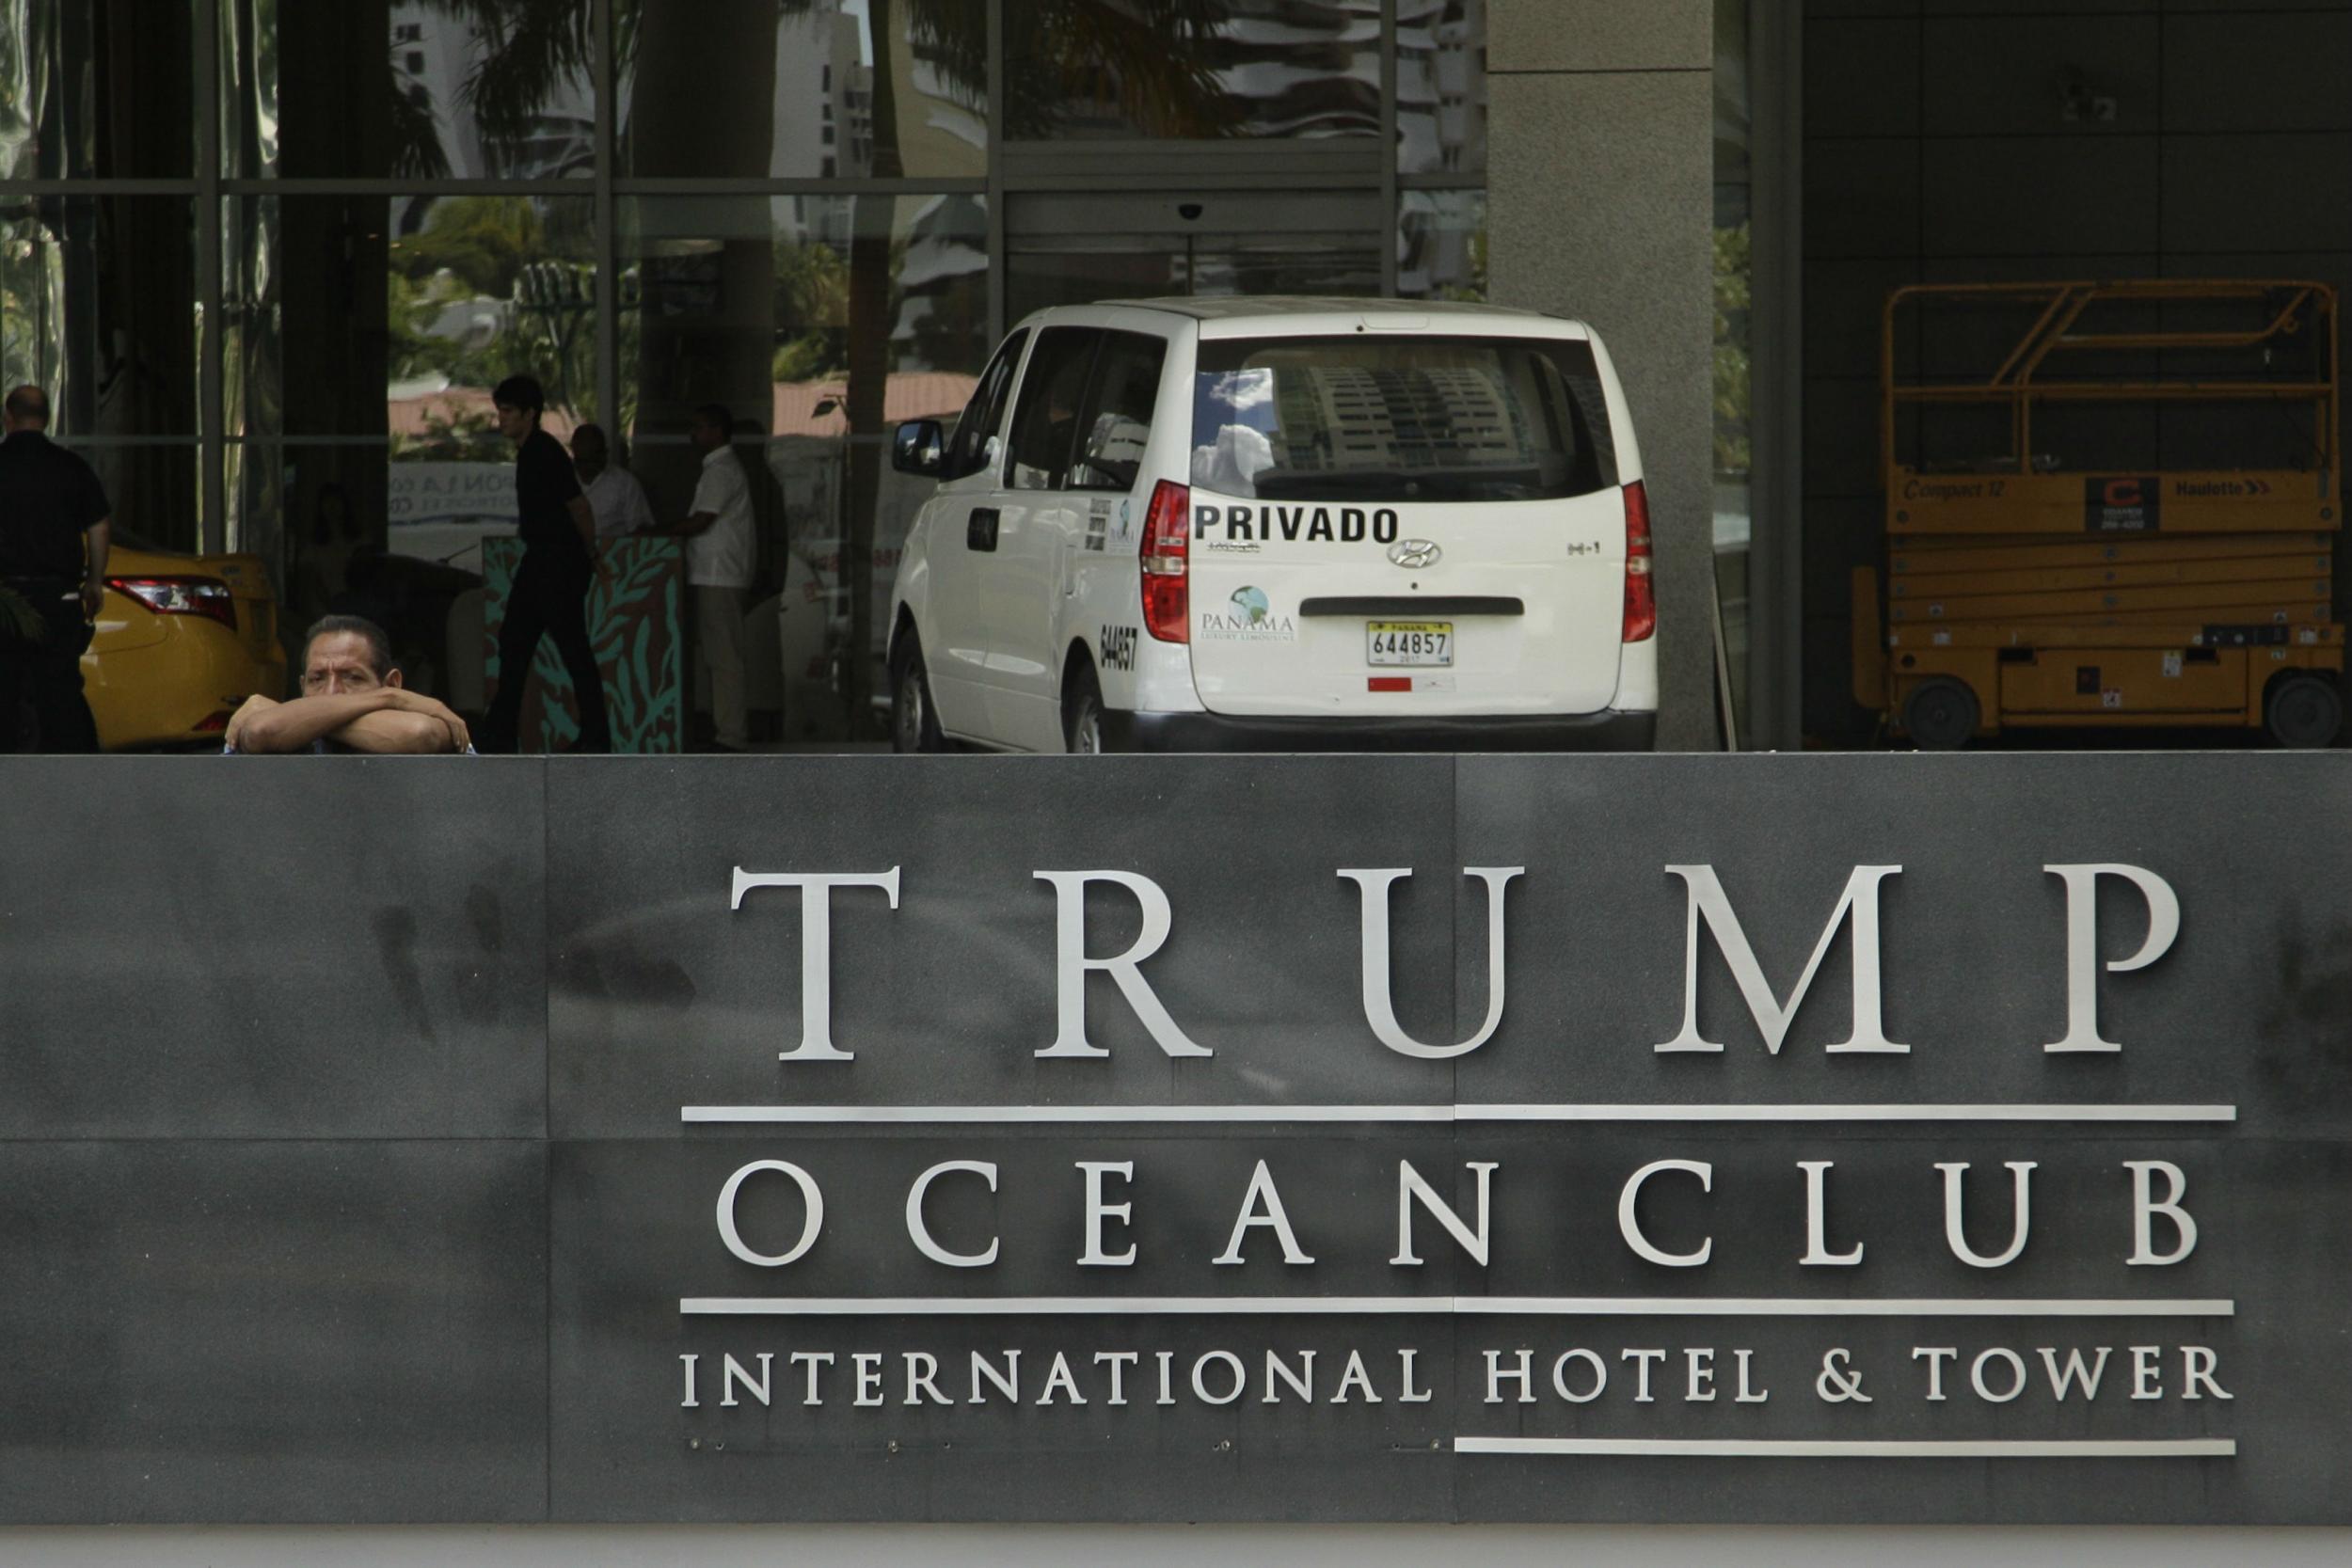 Mr Trump's hotel claims to be the only ocean front luxury property in the city